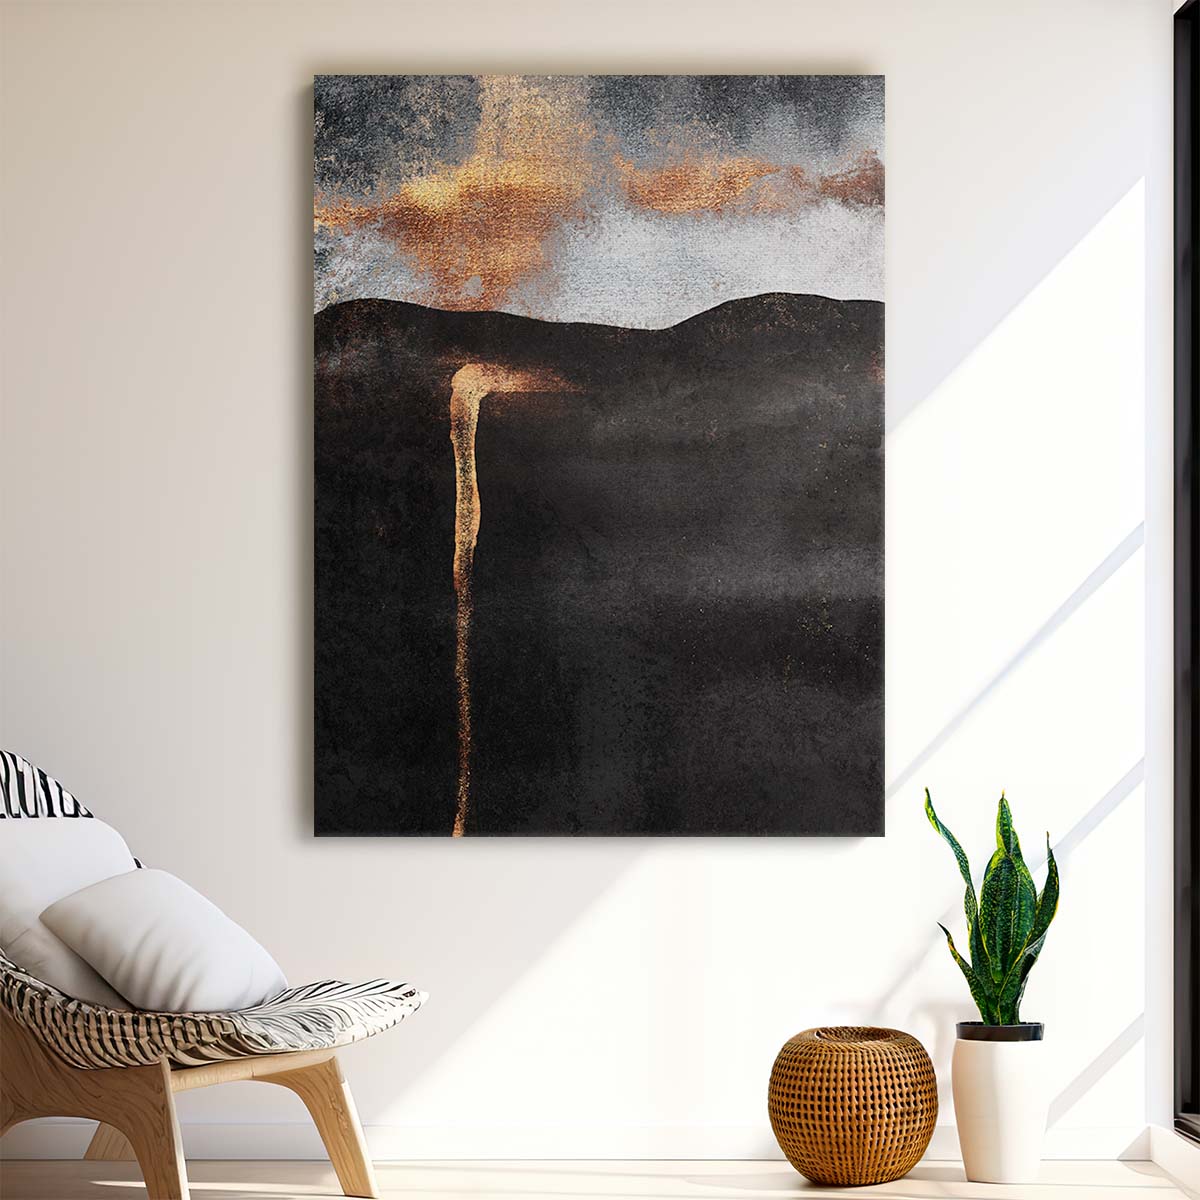 Gold Abstract Landscape Illustration on Textured Canvas - Ember Black White by Luxuriance Designs, made in USA